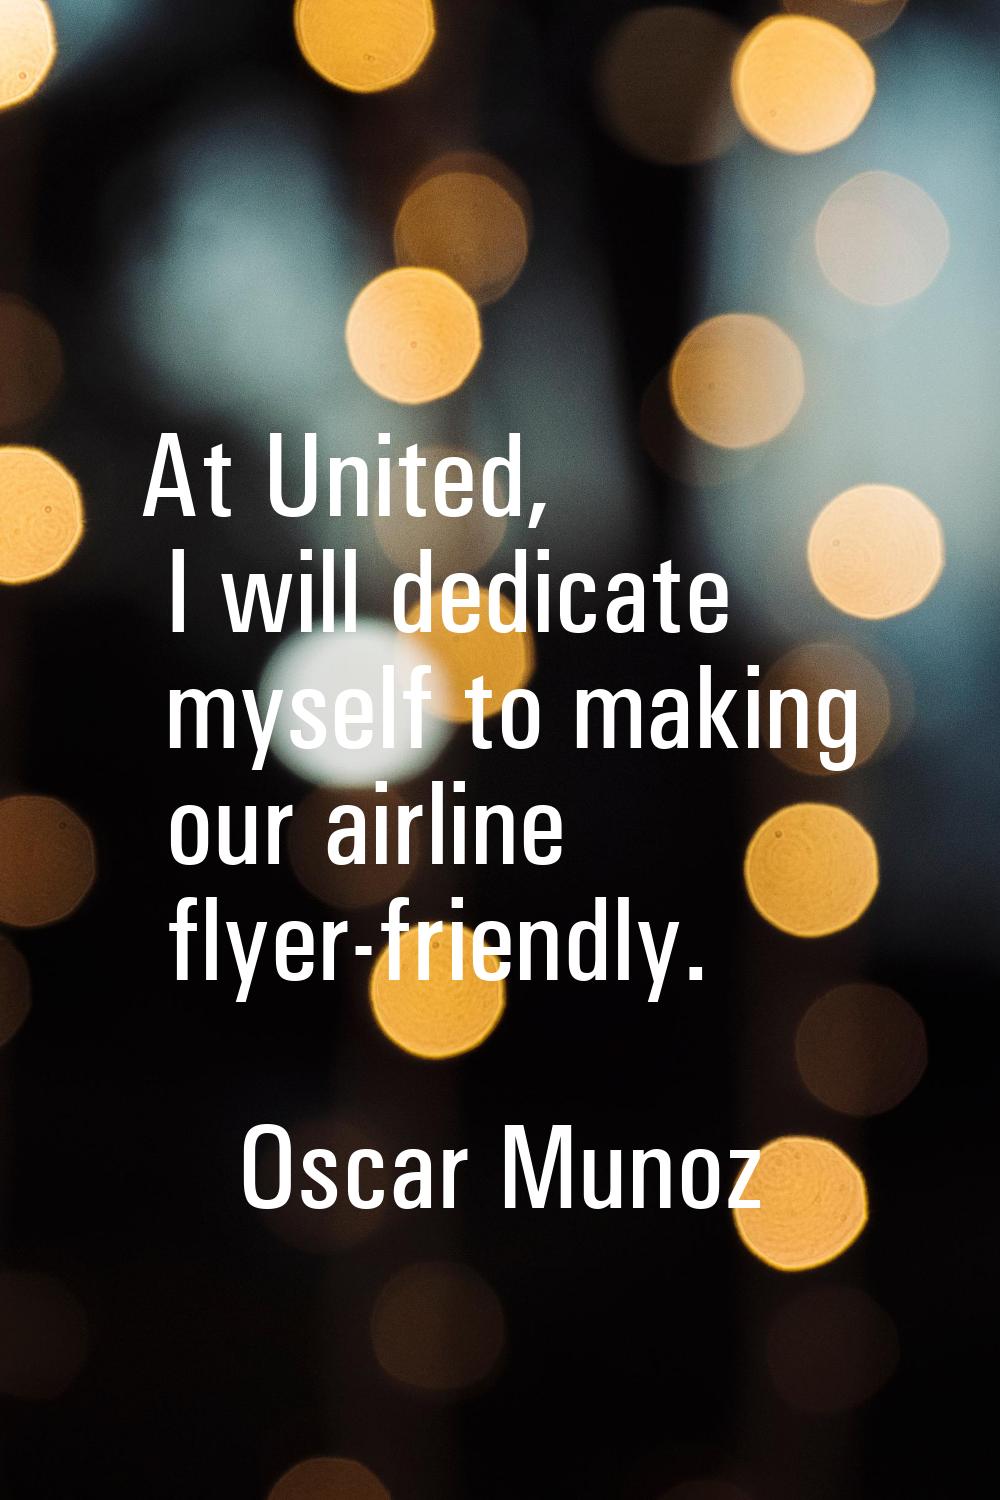 At United, I will dedicate myself to making our airline flyer-friendly.